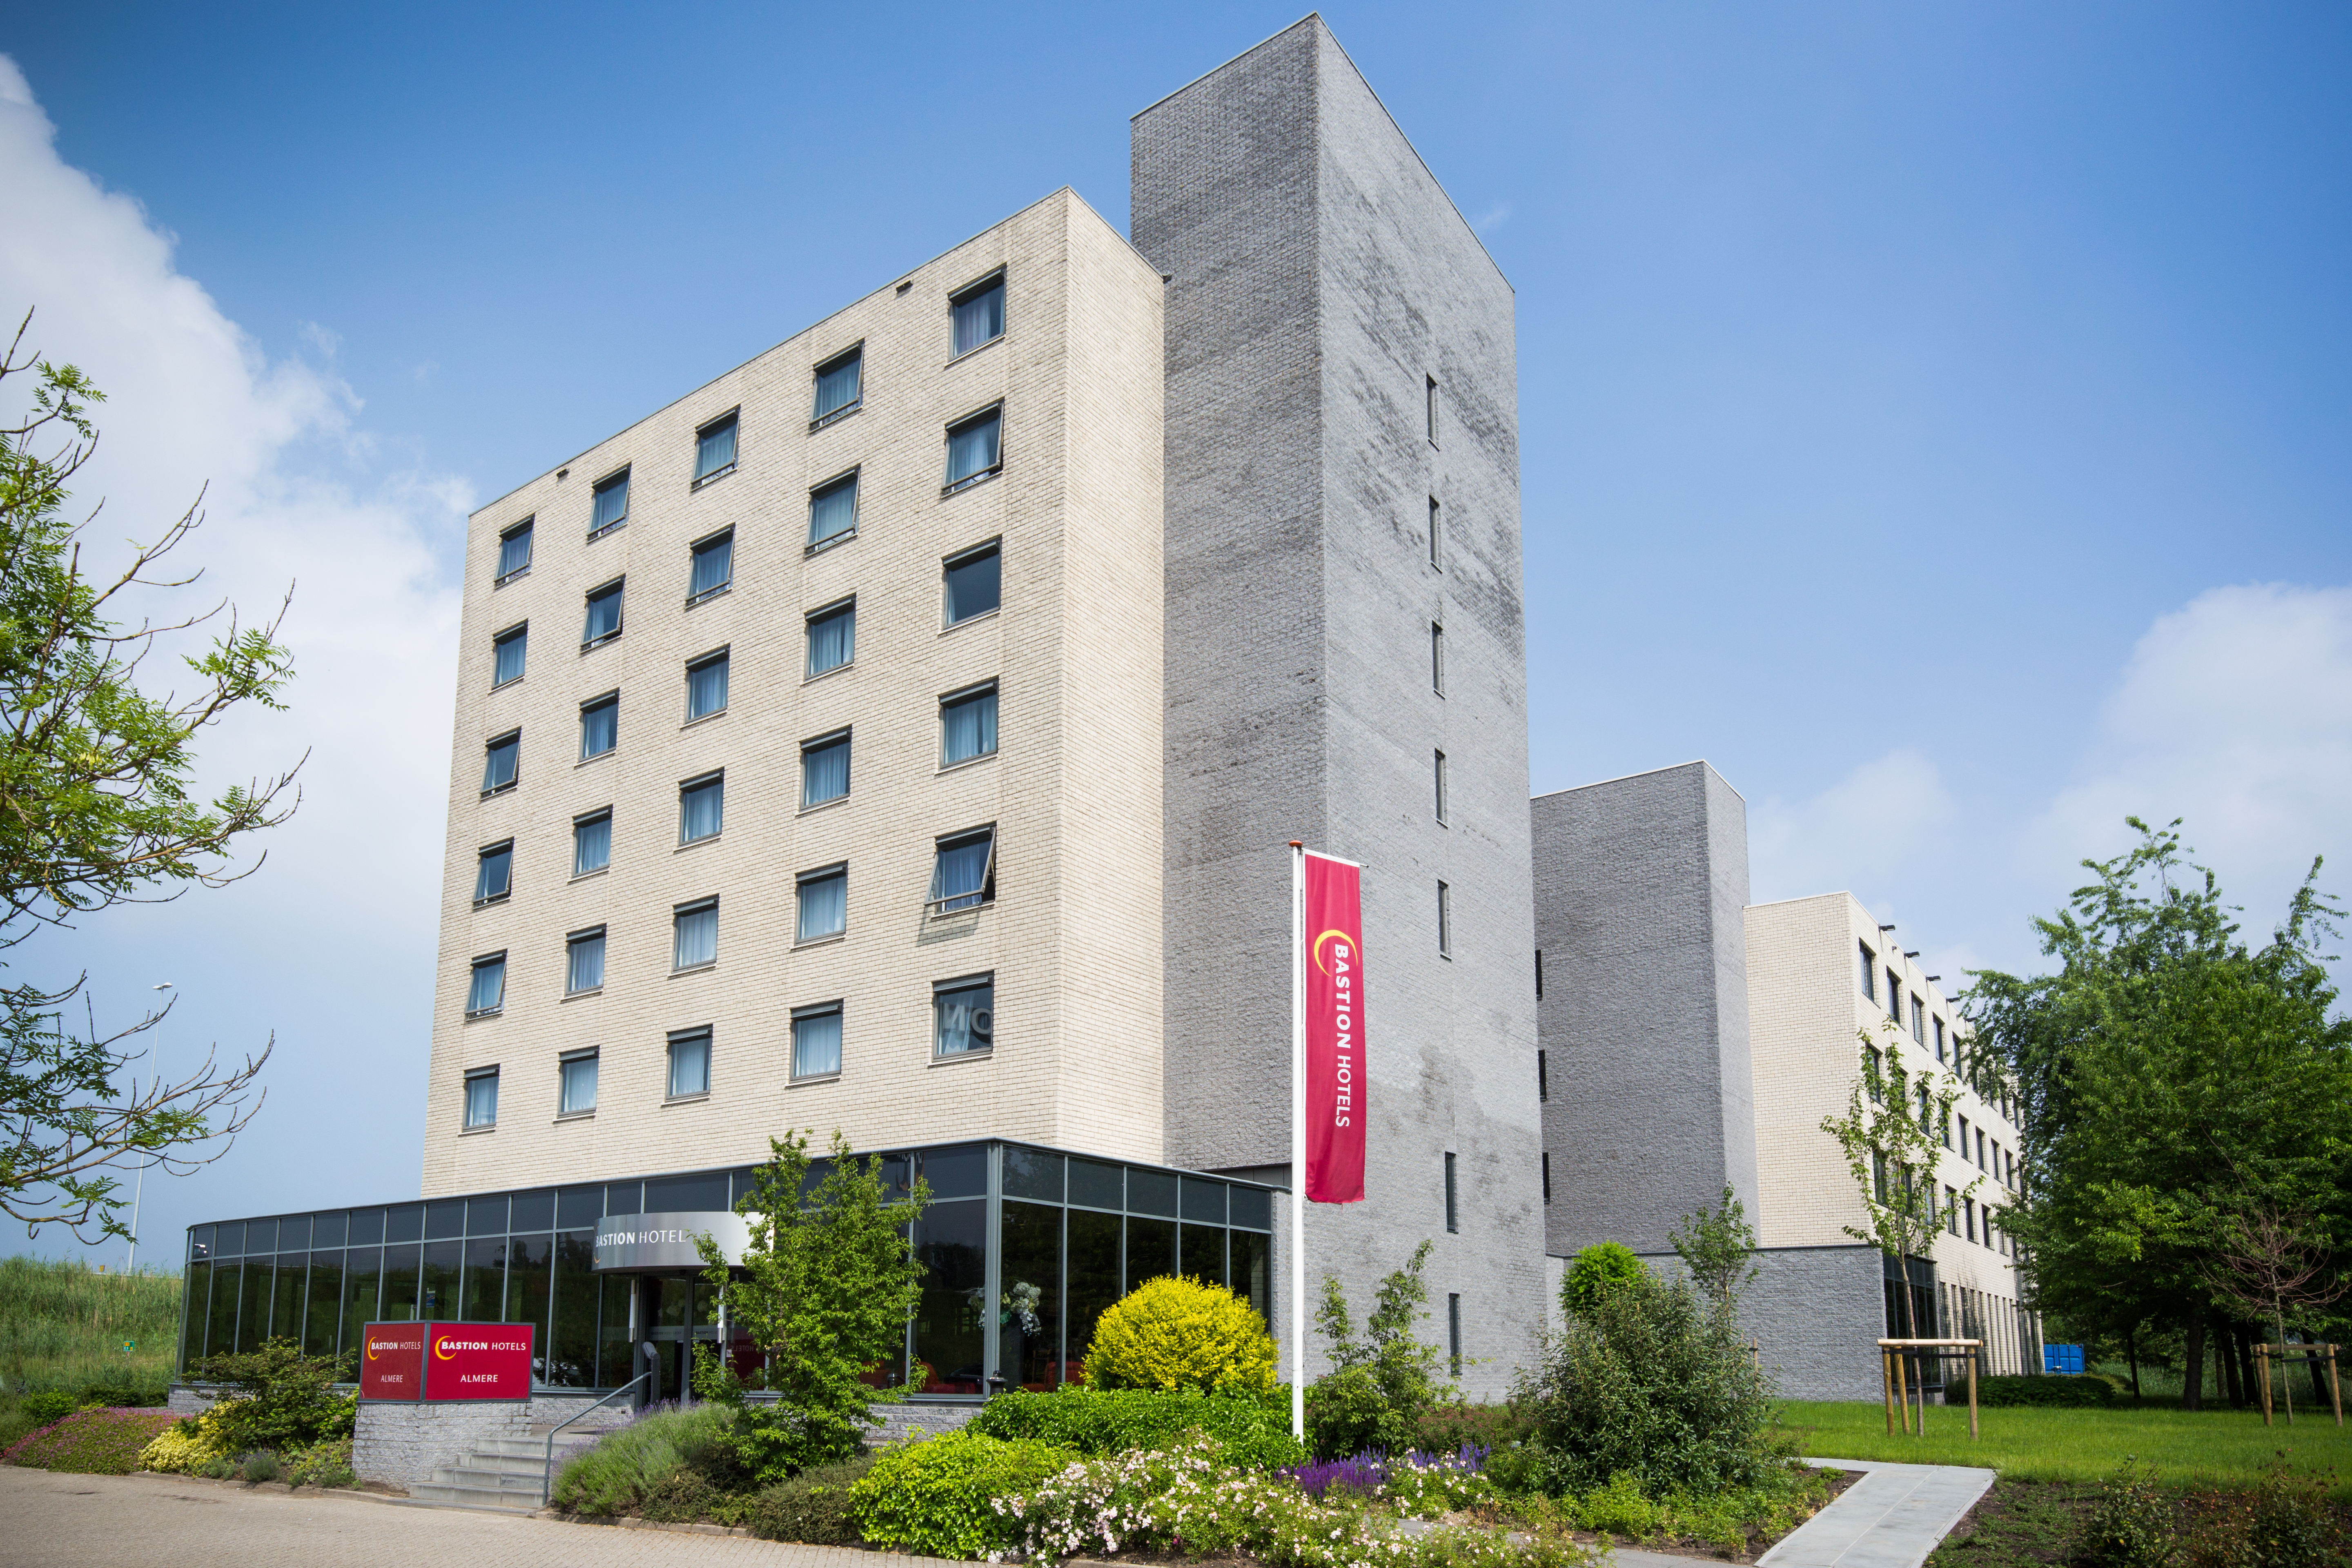 Bastion Hotel Almere <br/>64.00 ew <br/> <a href='http://vakantieoplossing.nl/outpage/?id=efd147f1dc63d867c12340d7fe300c8e' target='_blank'>View Details</a>